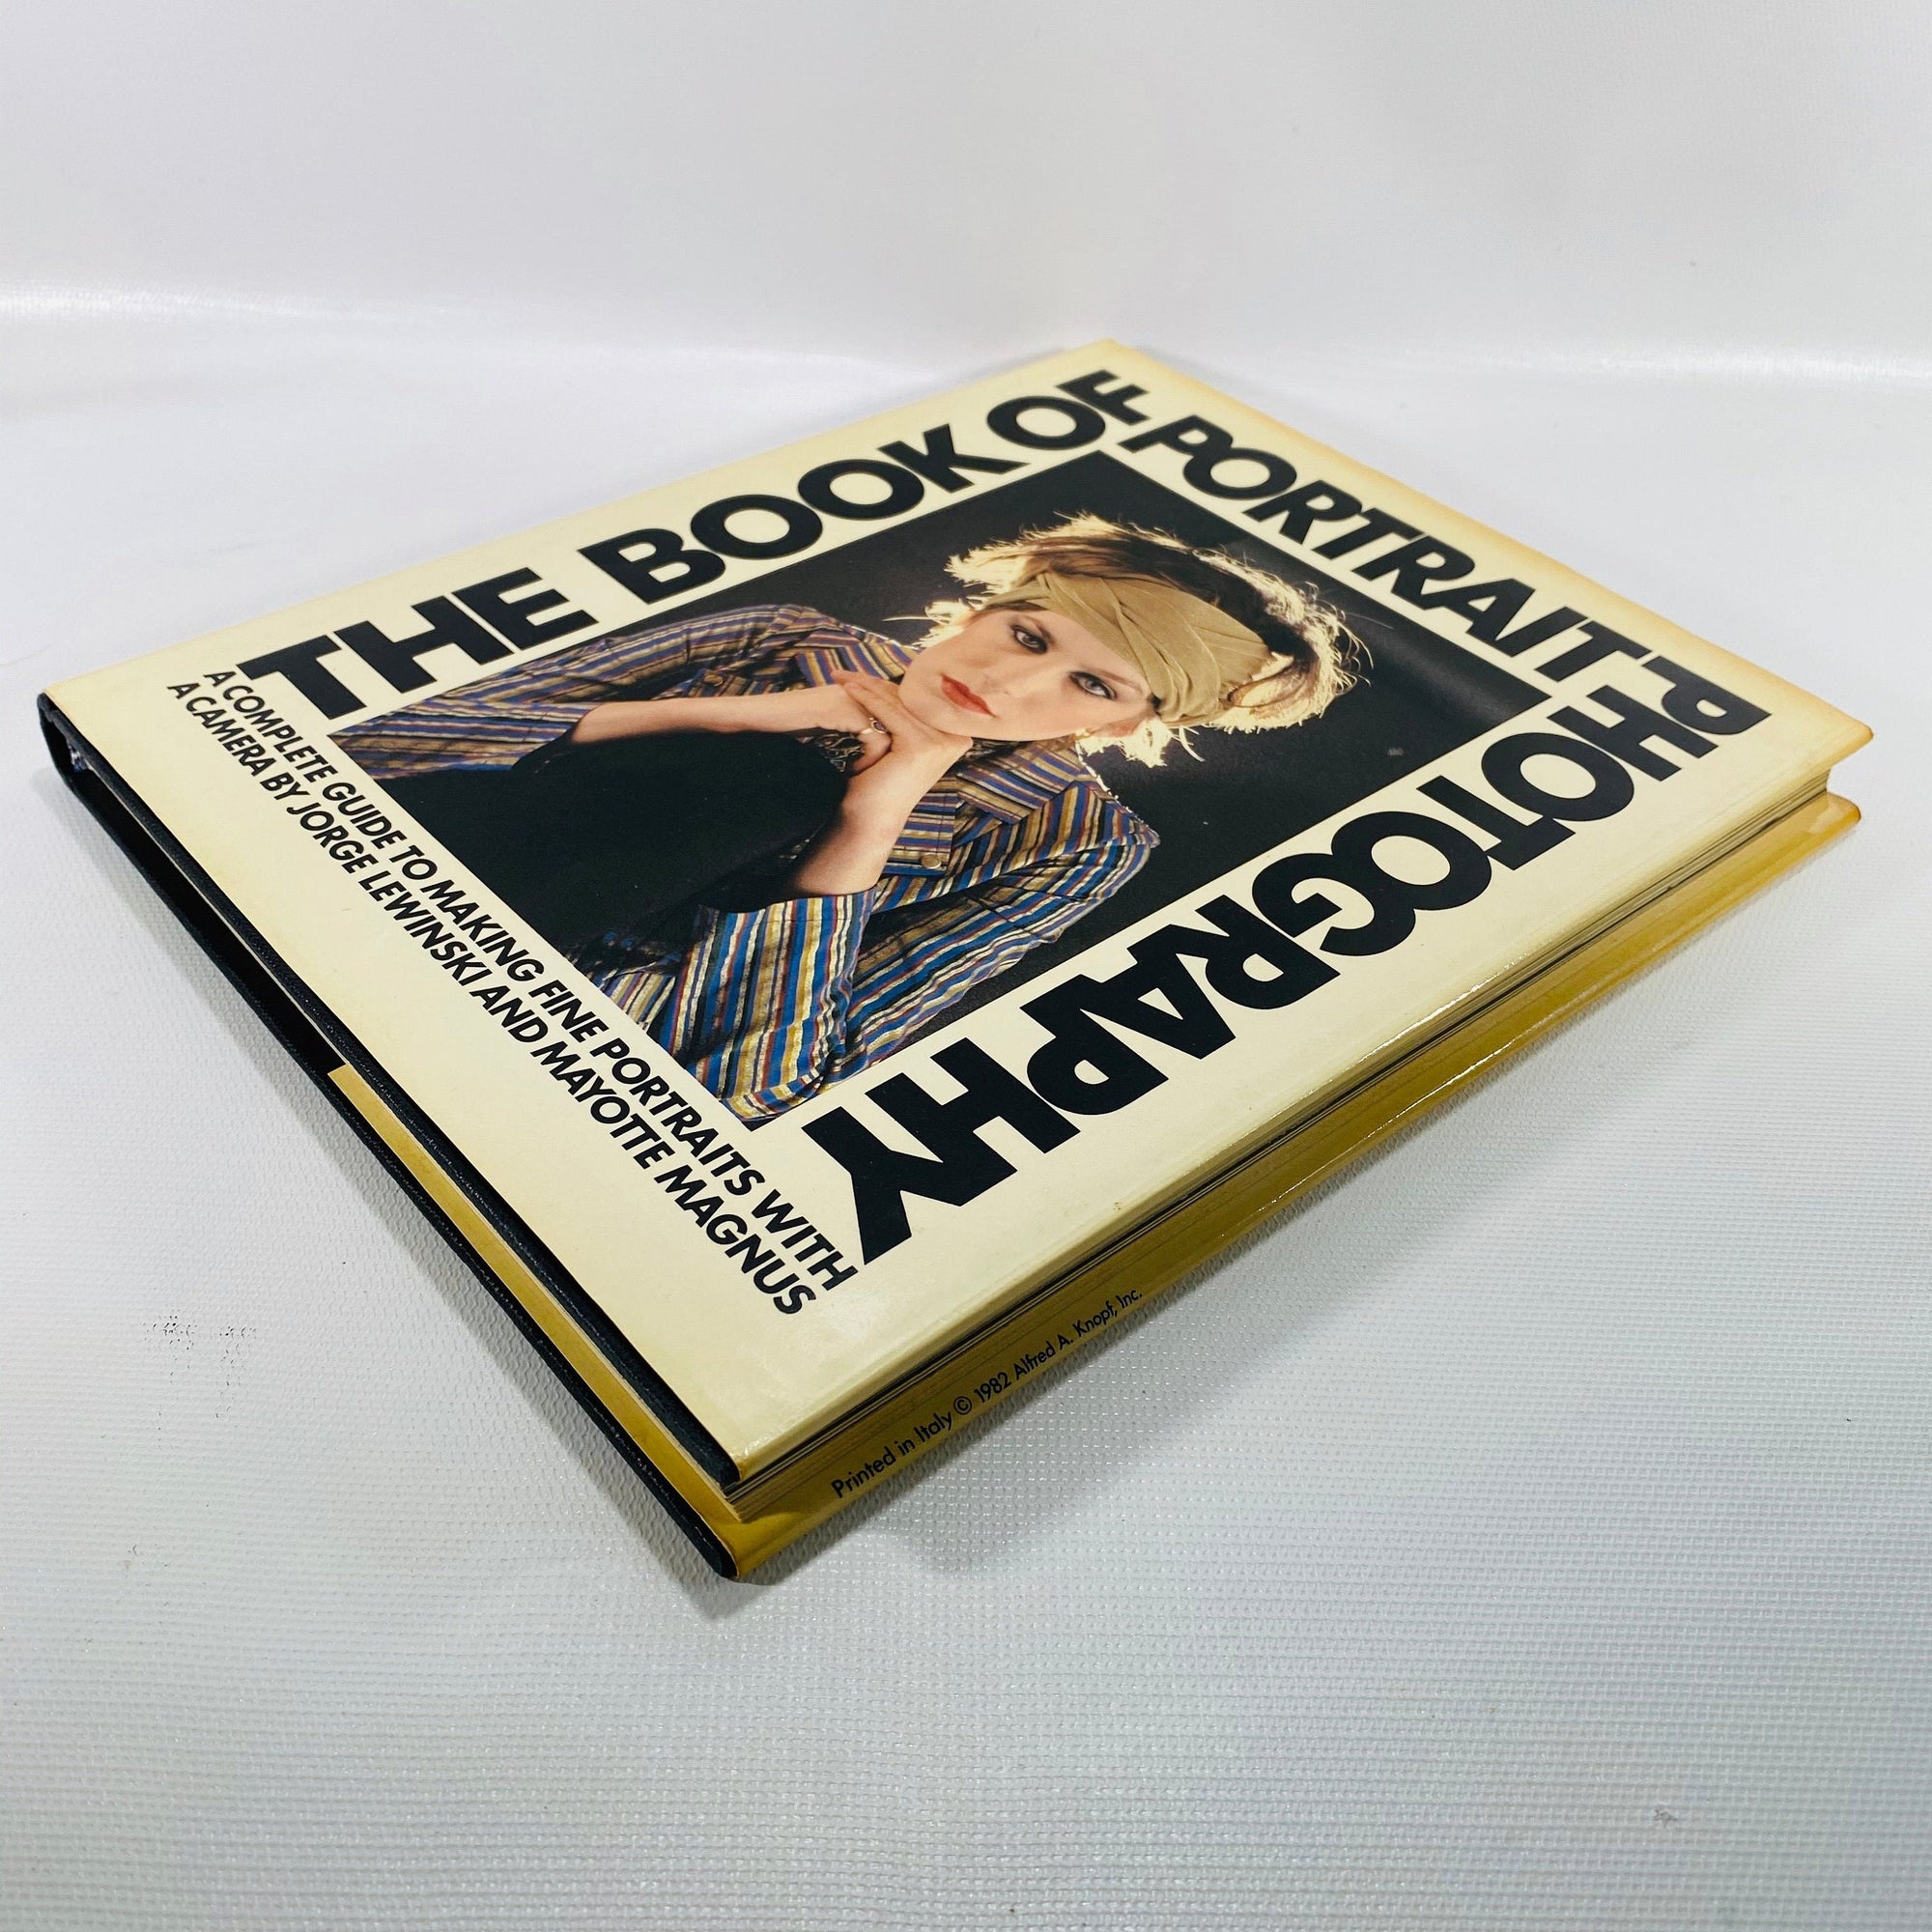 The Book of Portrait Photography by Jorge Lewinski 1982 Vintage Book